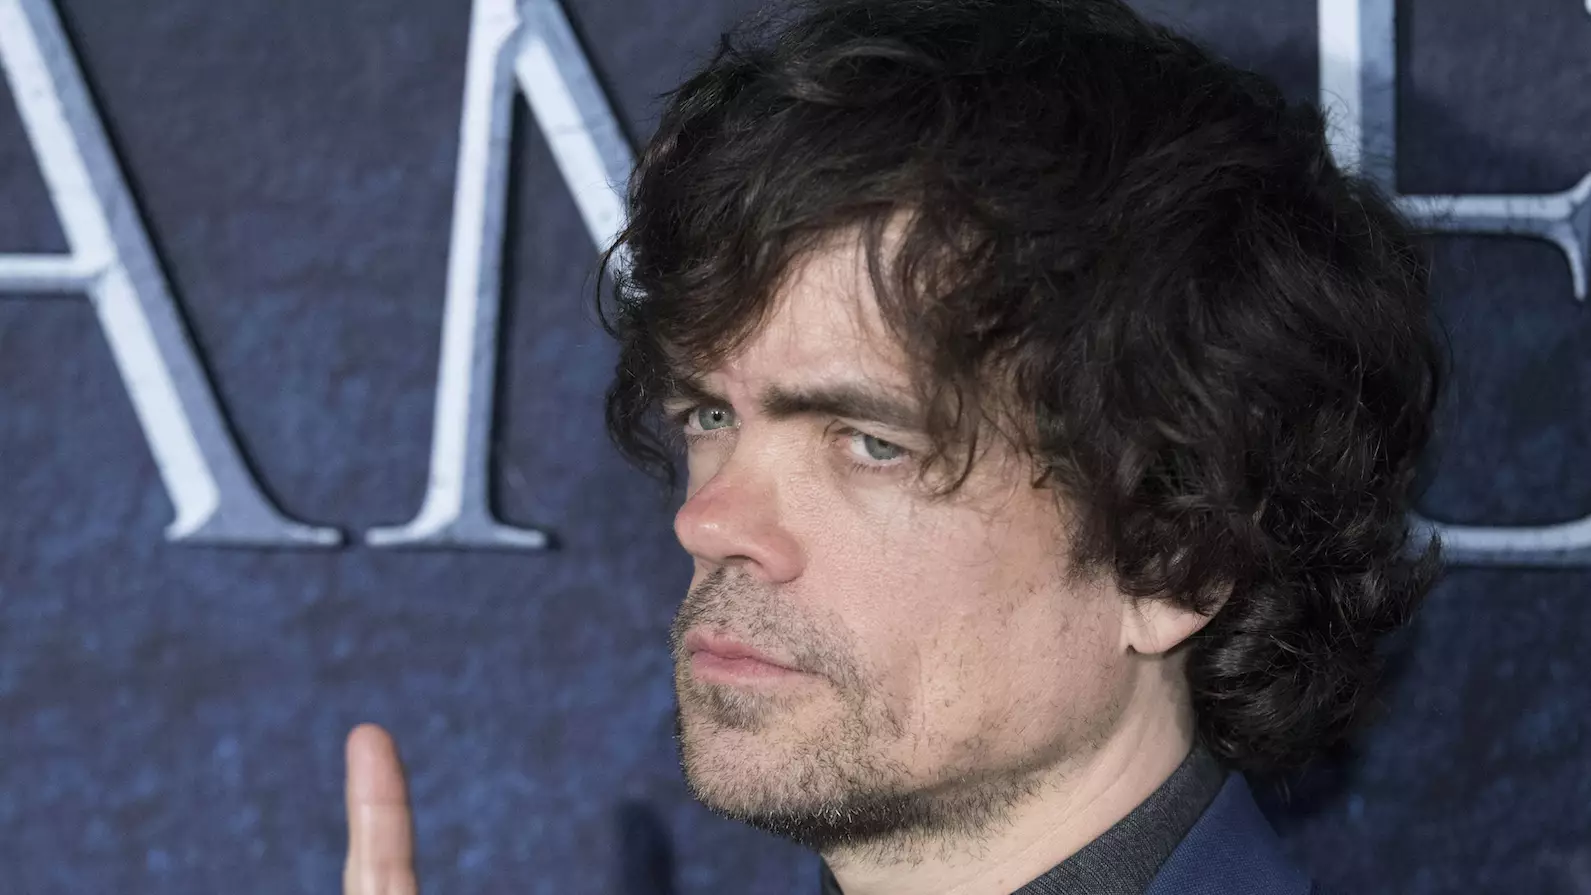 Peter Dinklage From 'Game Of Thrones' Will Star In 'Avengers: Infinity Wars'